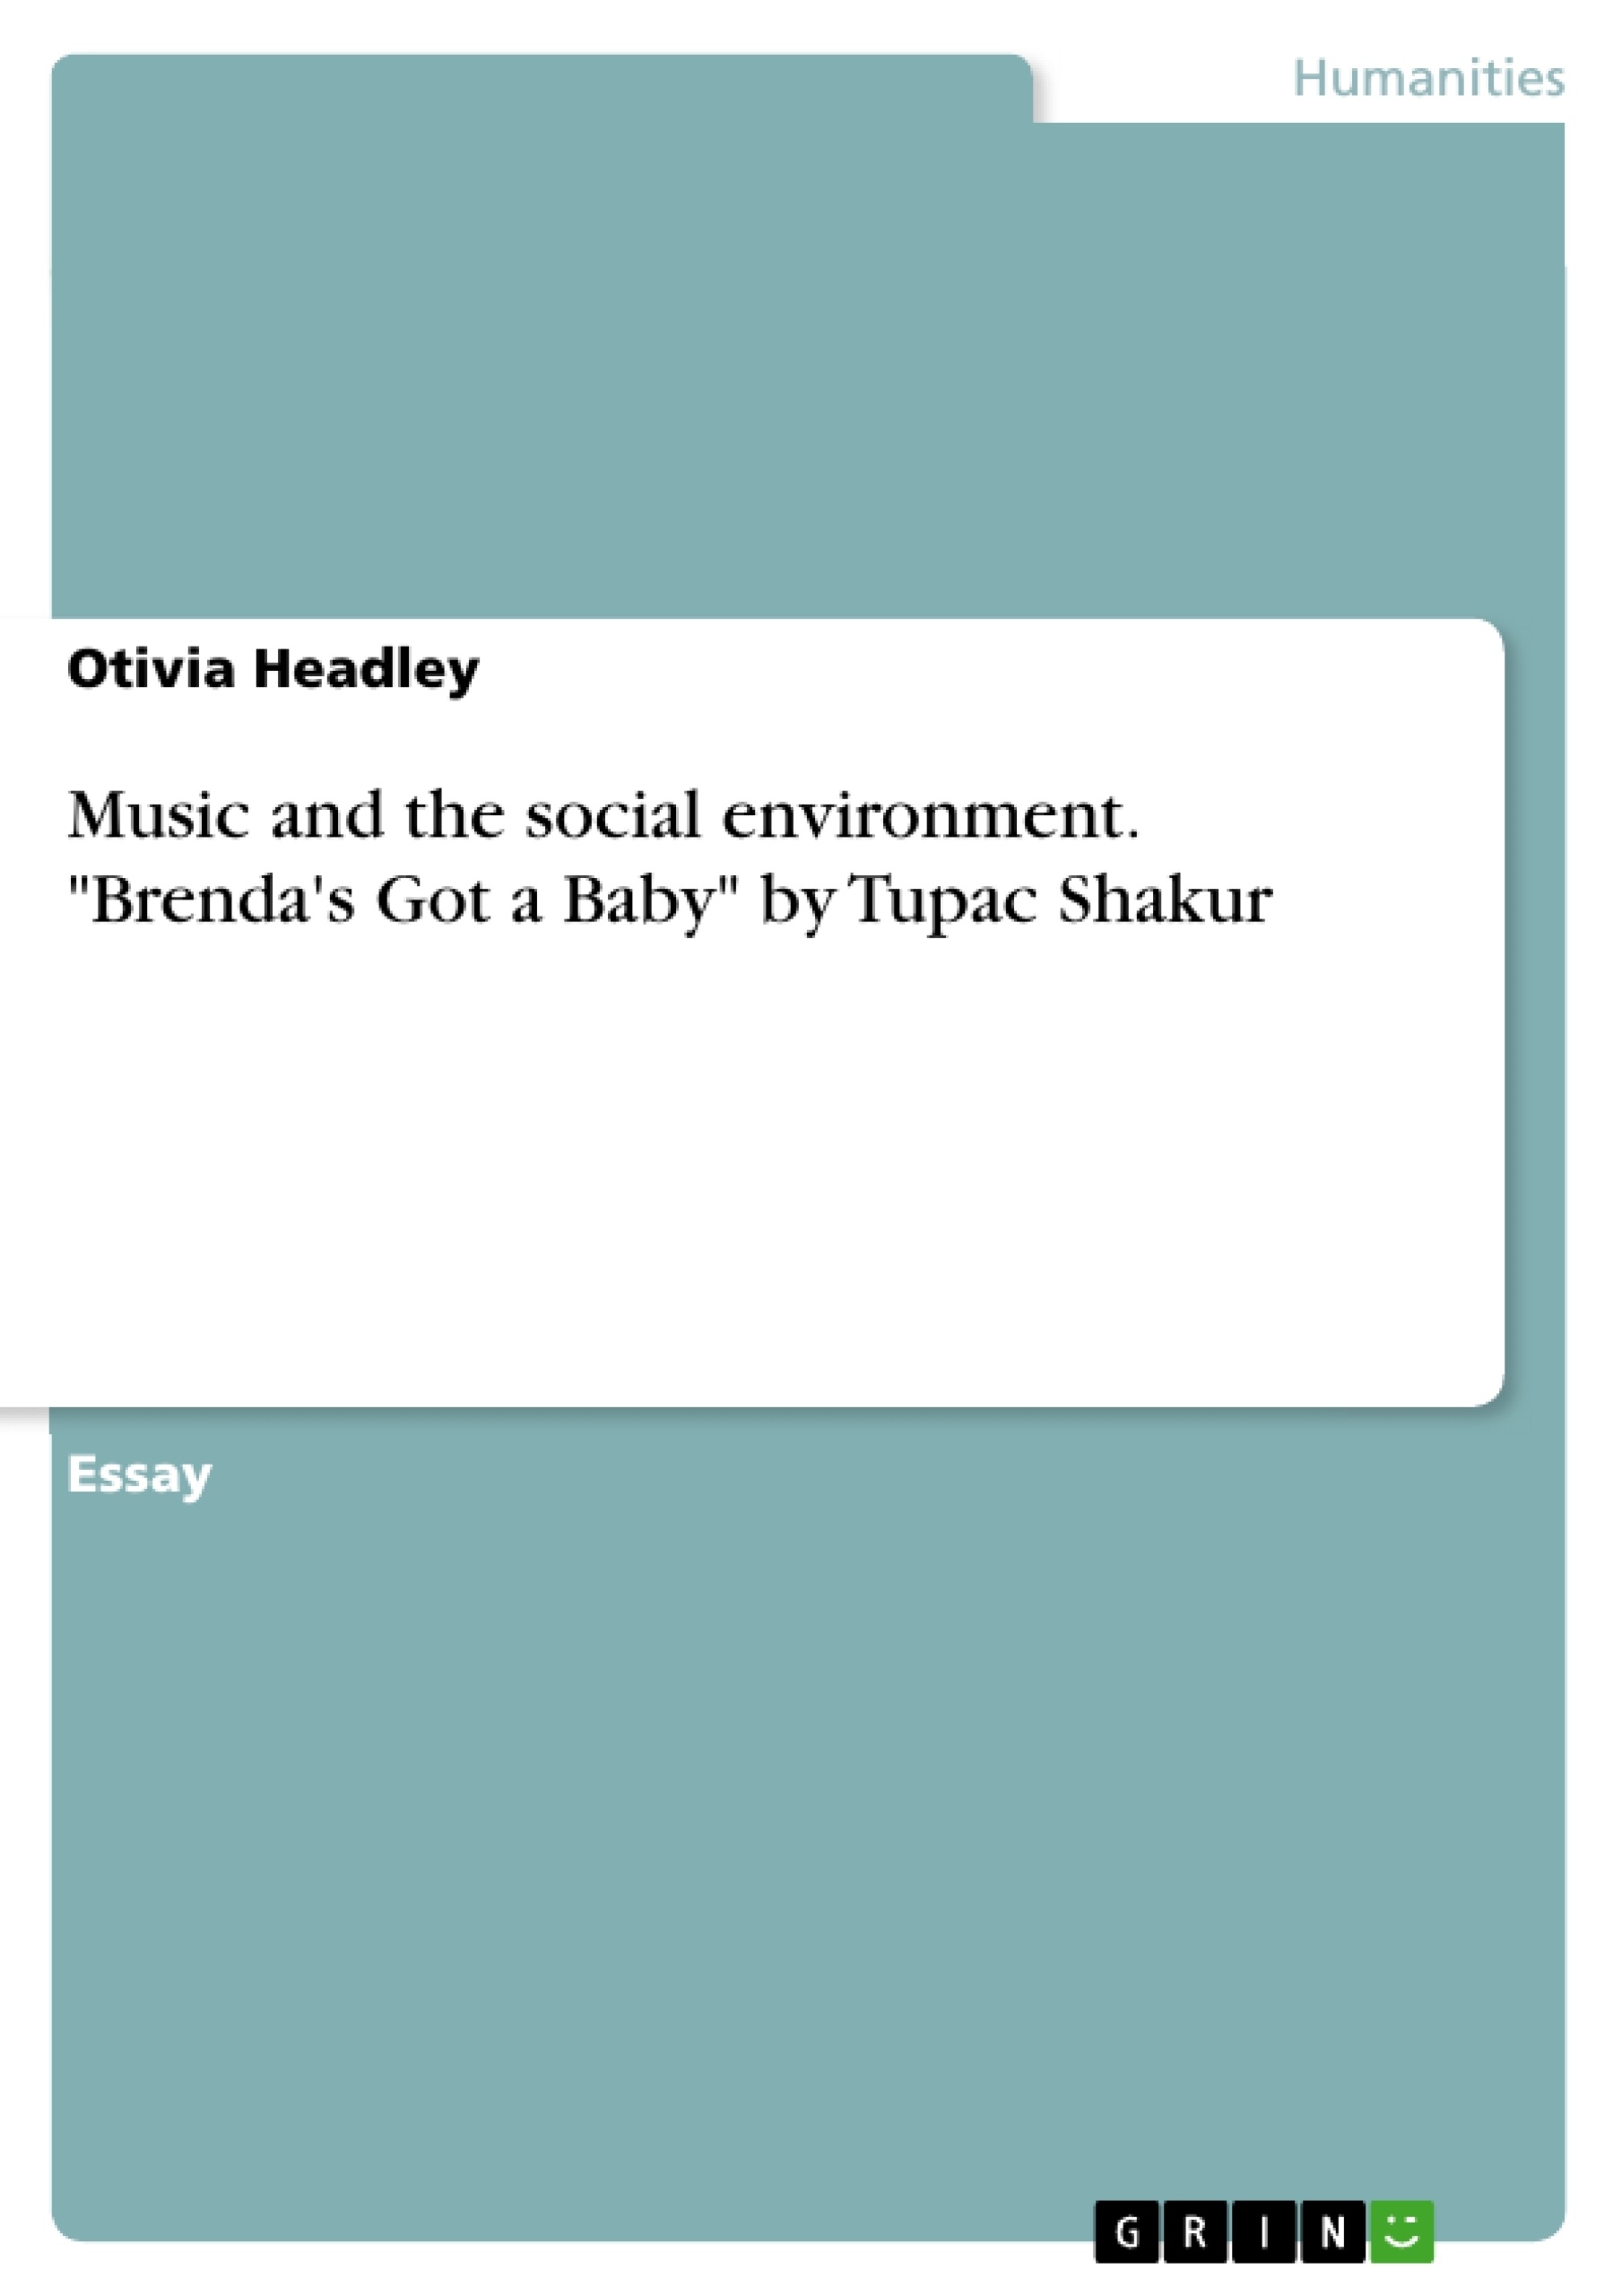 Título: Music and the social environment. "Brenda's Got a Baby" by Tupac Shakur